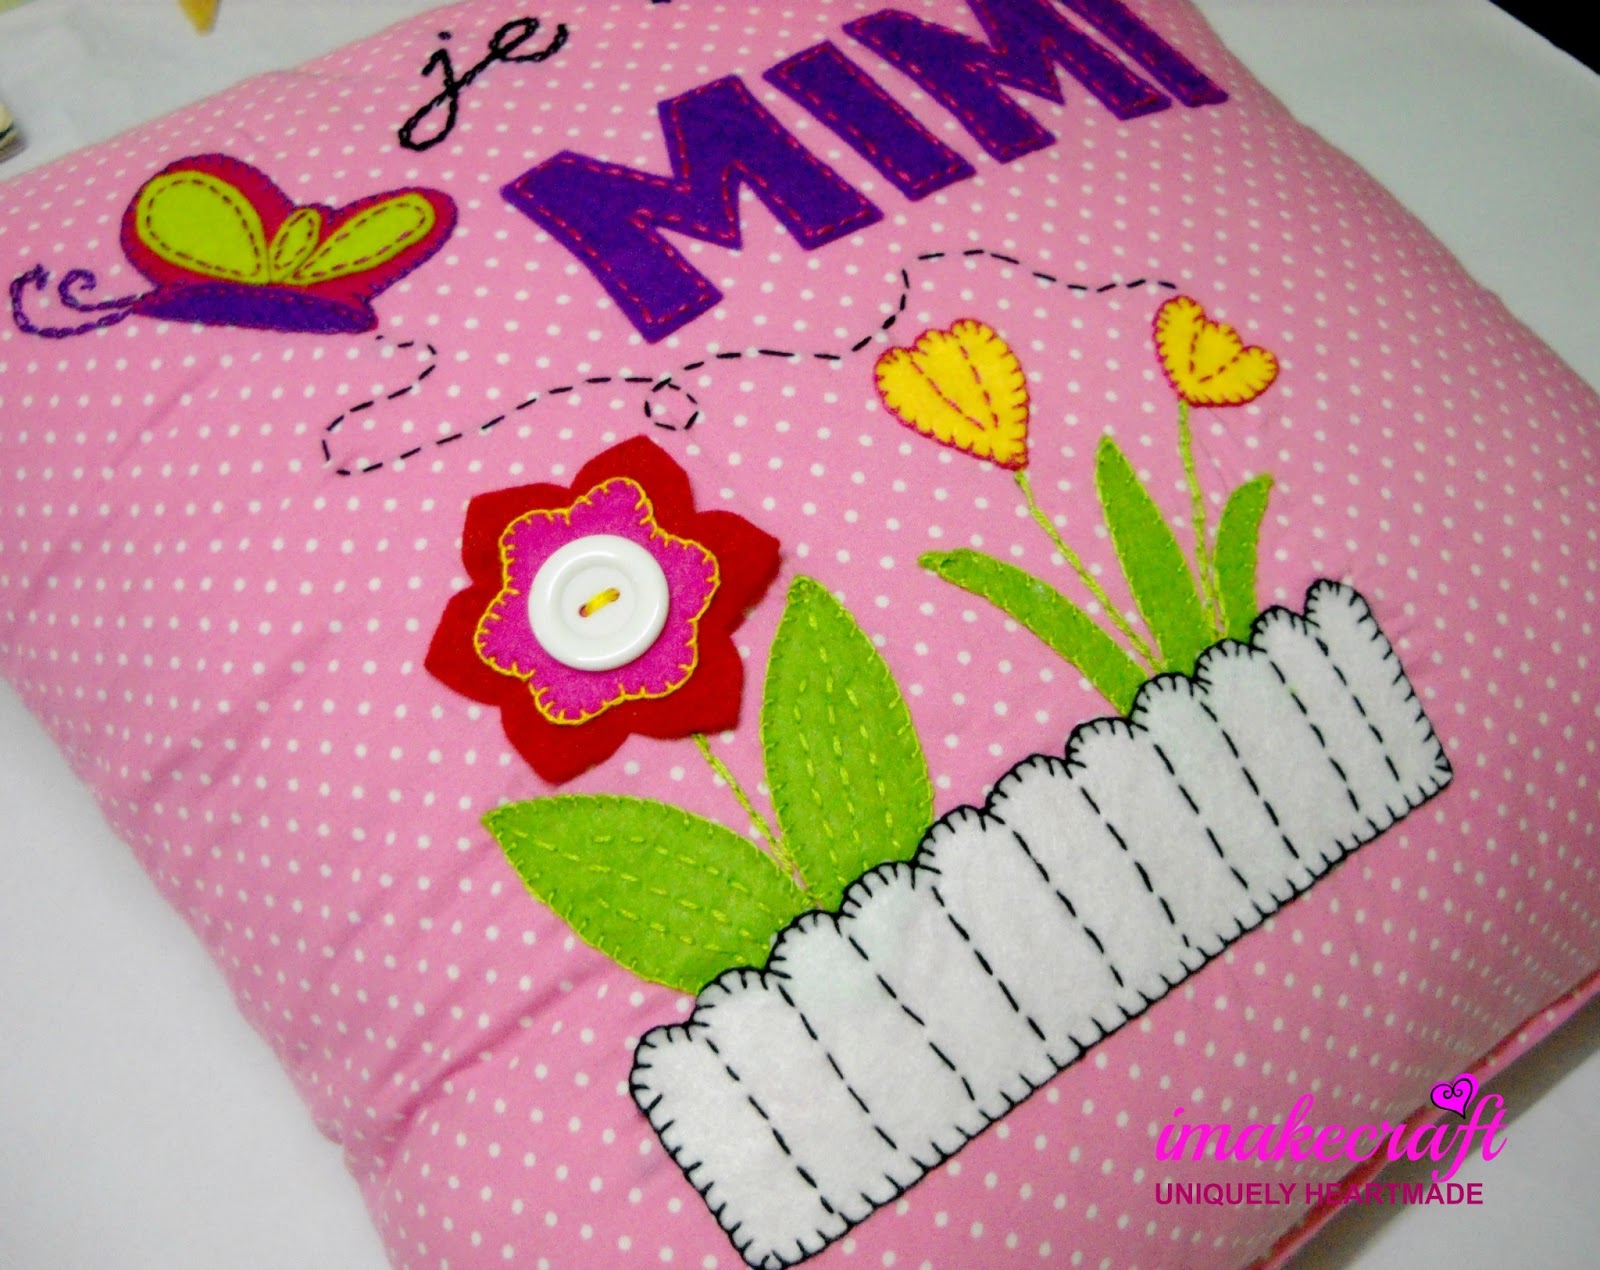 imakecraft: Personalized Pillow again - Butterfly in the garden